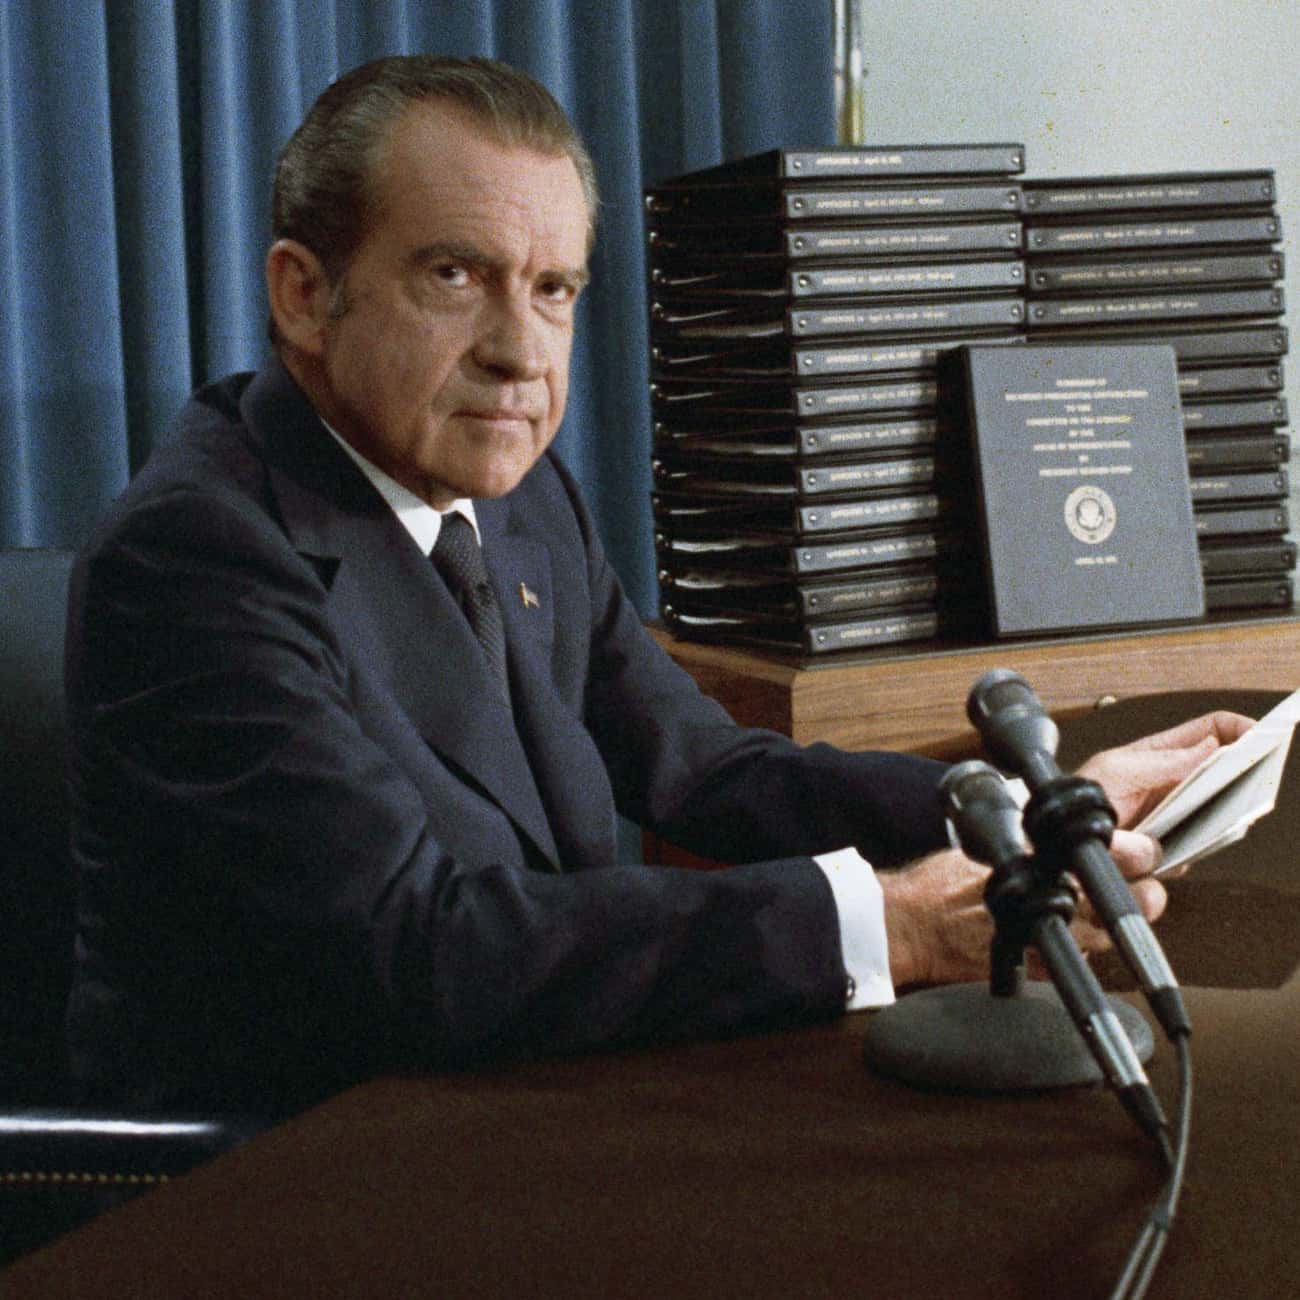 Nixon Belittled The Deaths Of Vietnam Soldiers While Drunk